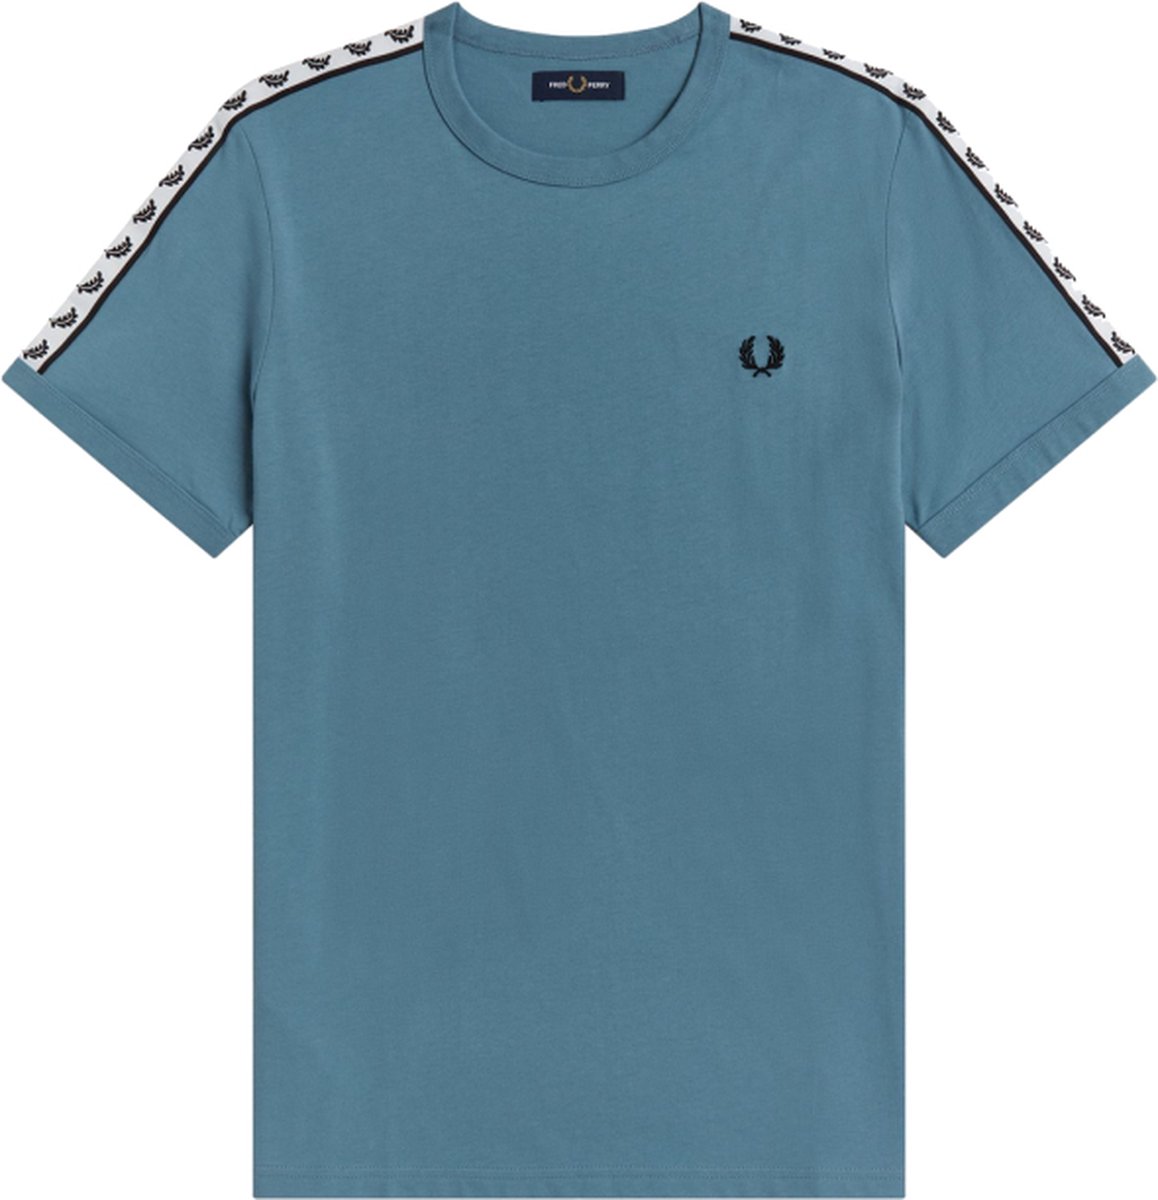 Fred Perry Taped Ringer Tee sportshirt heren blauw